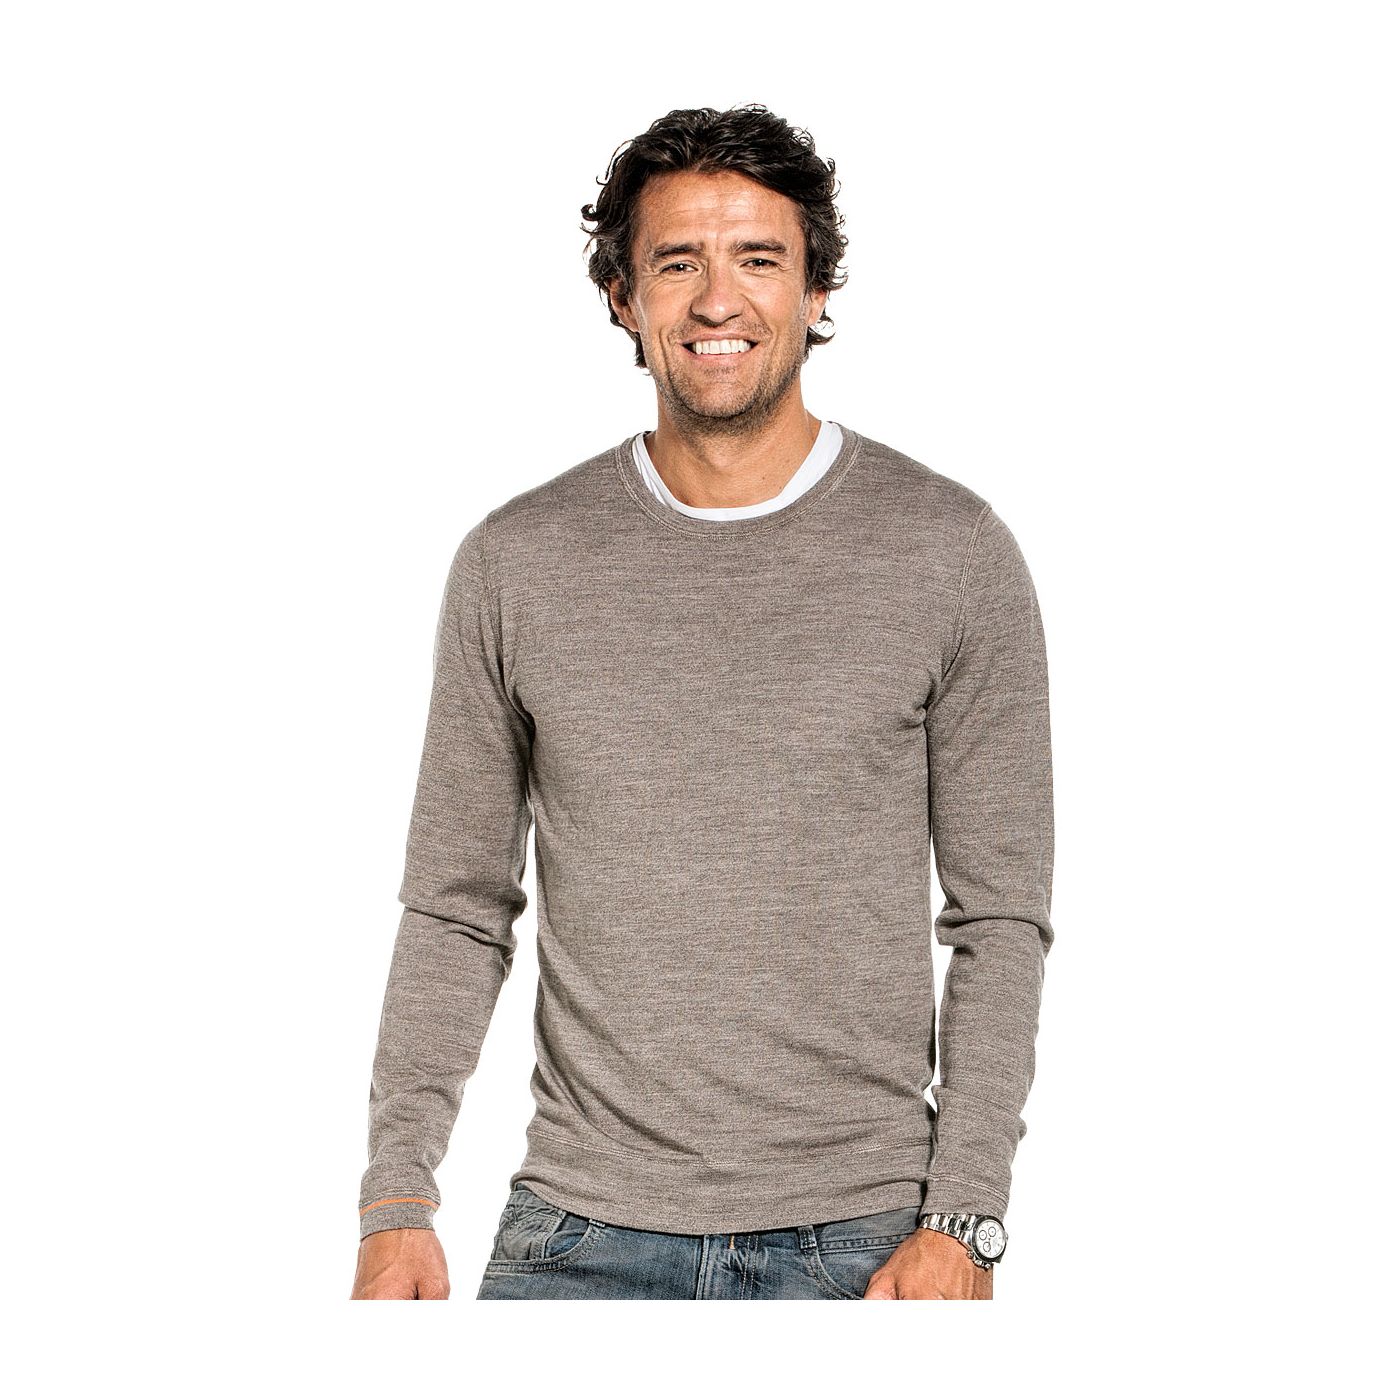 Crew neck pullover for men made of Merino wool in Brown